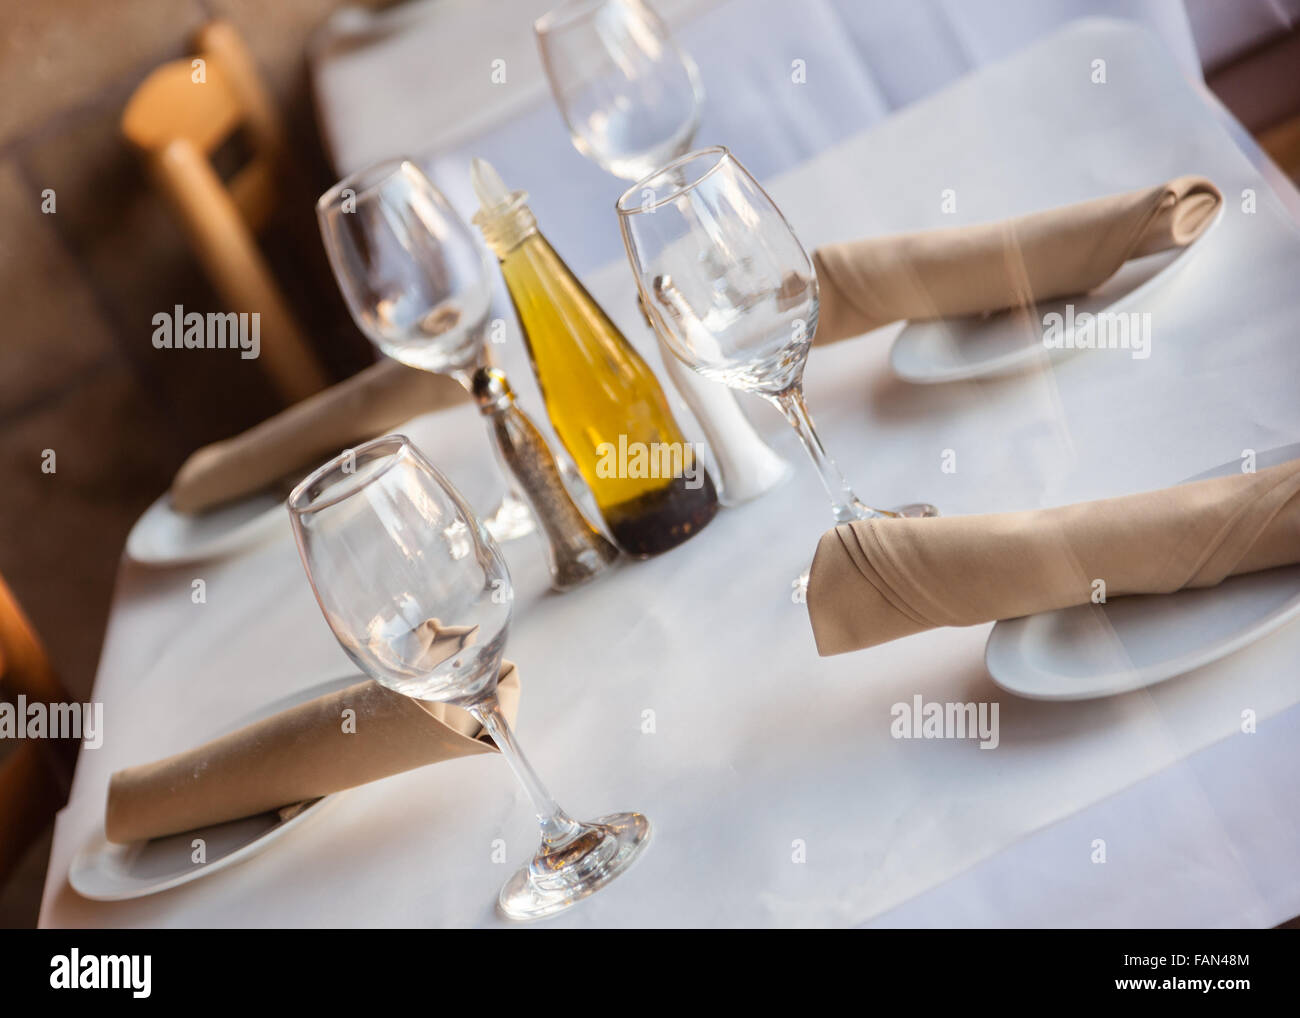 Simple Table setting in a restaurant with white tablecloth napkins and wine glasses. Stock Photo